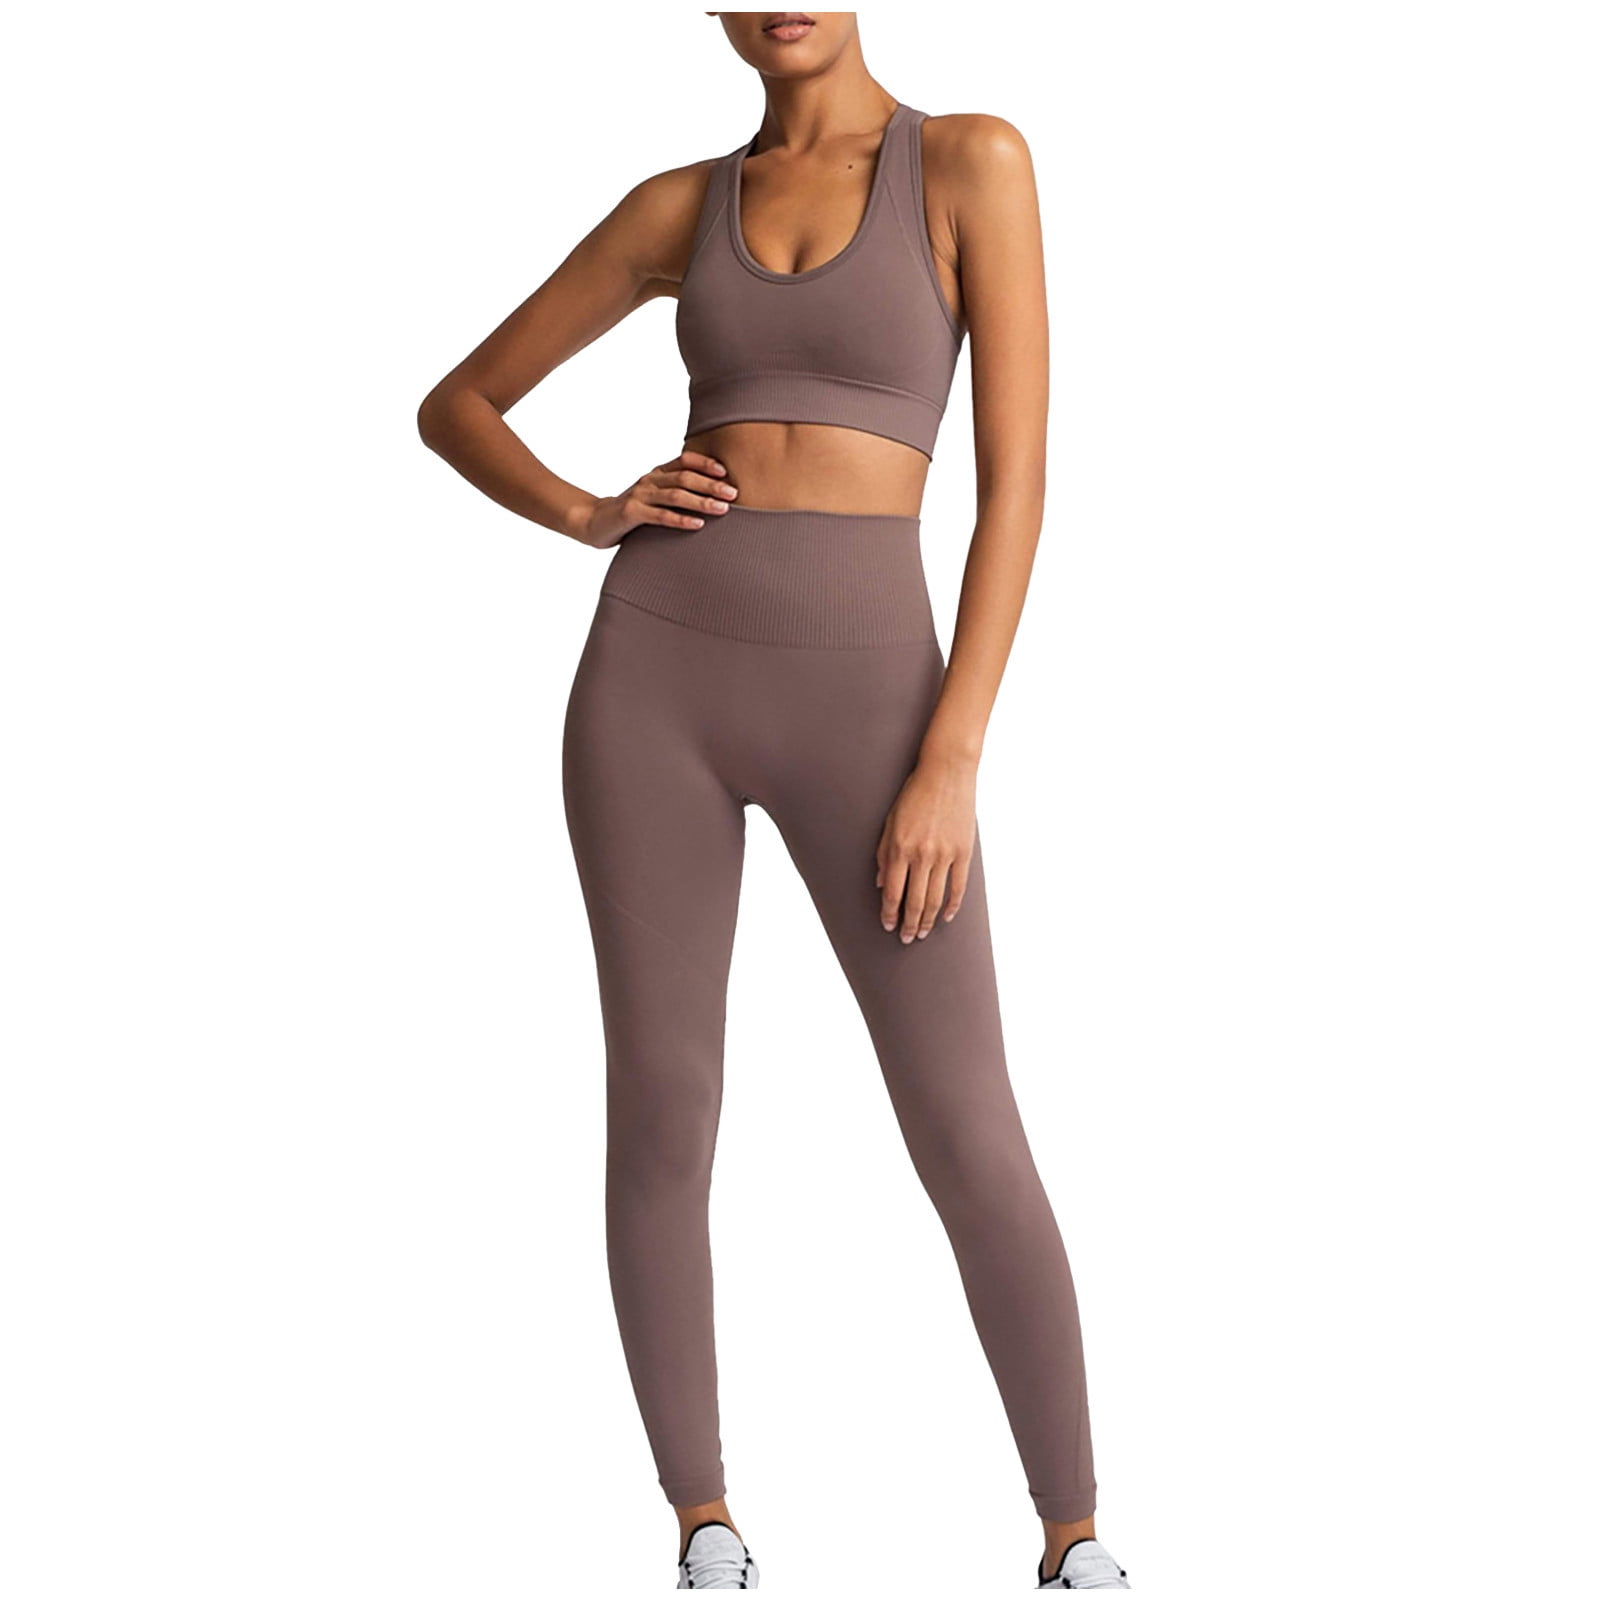  Brown 2 Piece Workout Set for Women Outfit Gym High Waist  Leggings with Padded Push Up Sport Bra M : Sports & Outdoors